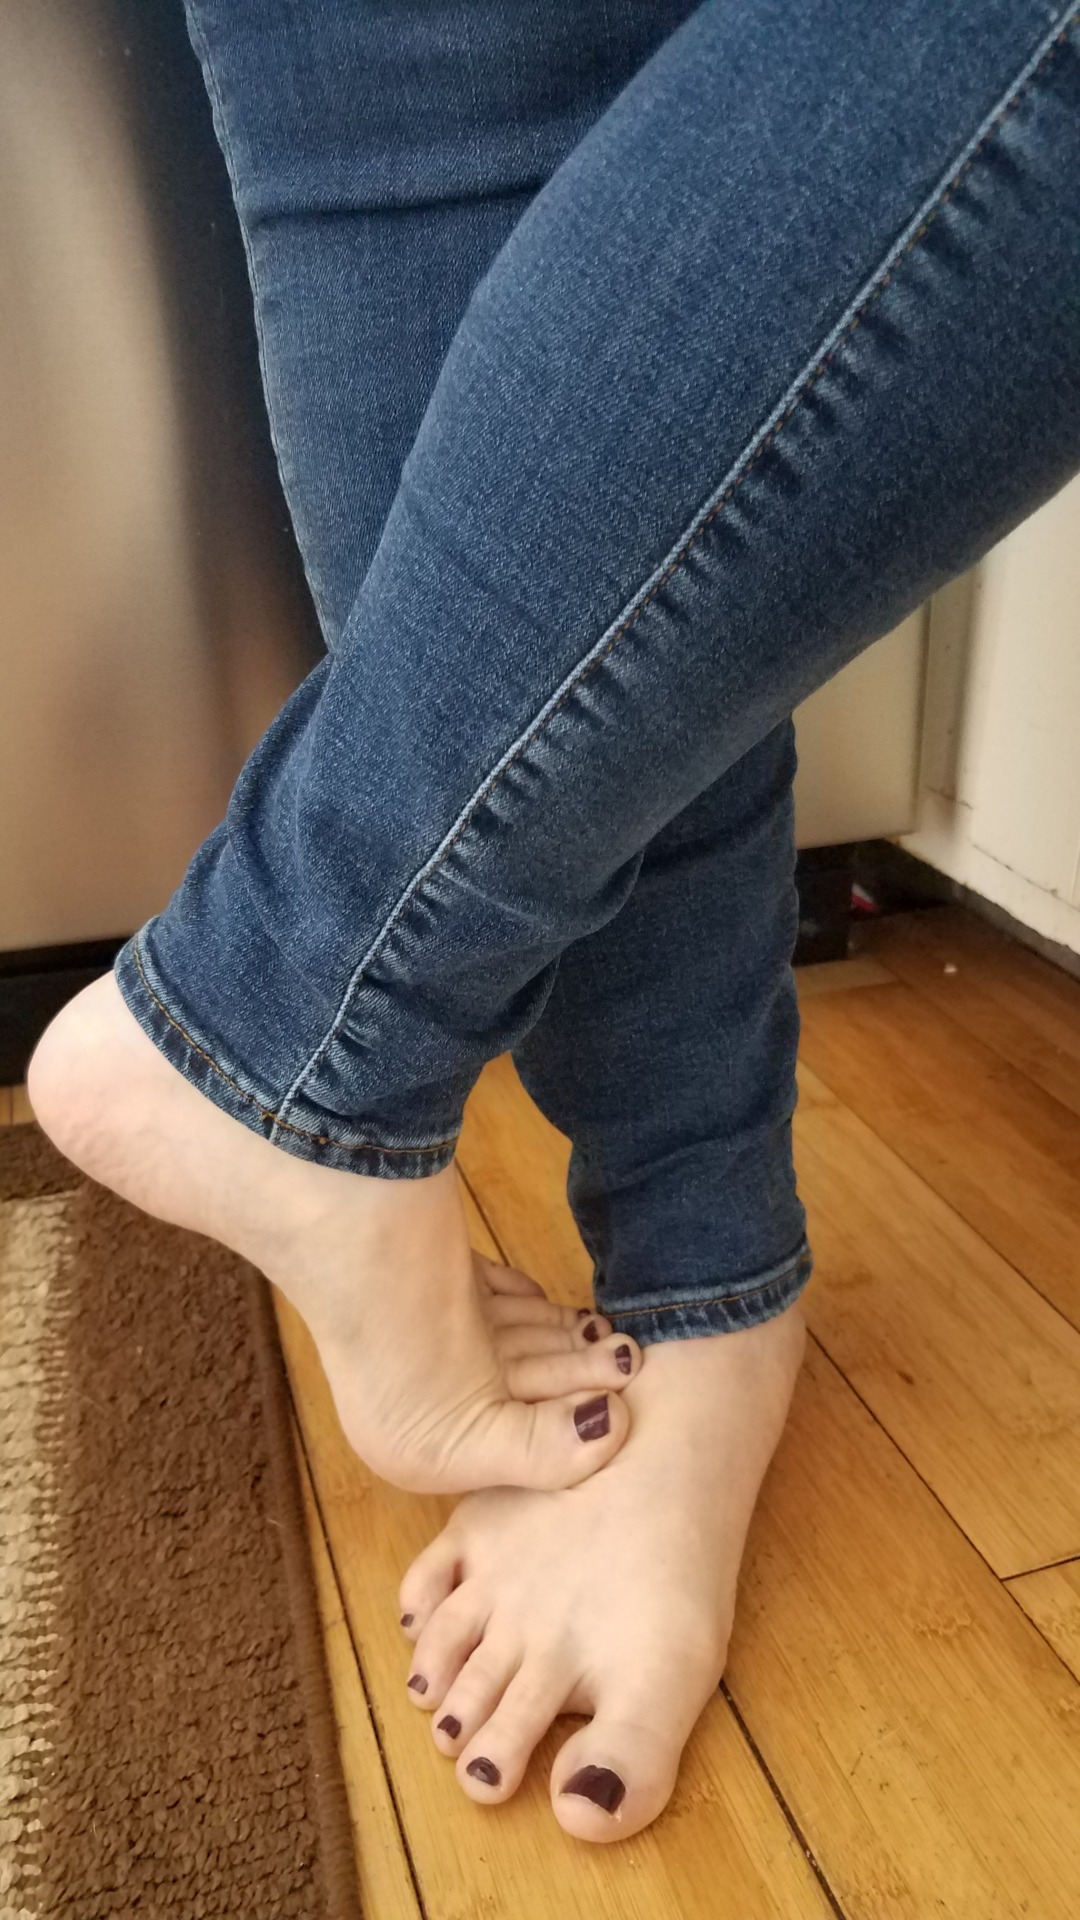 Candid Homemade And All Original Pics — My Pretty Wife Sent Me This